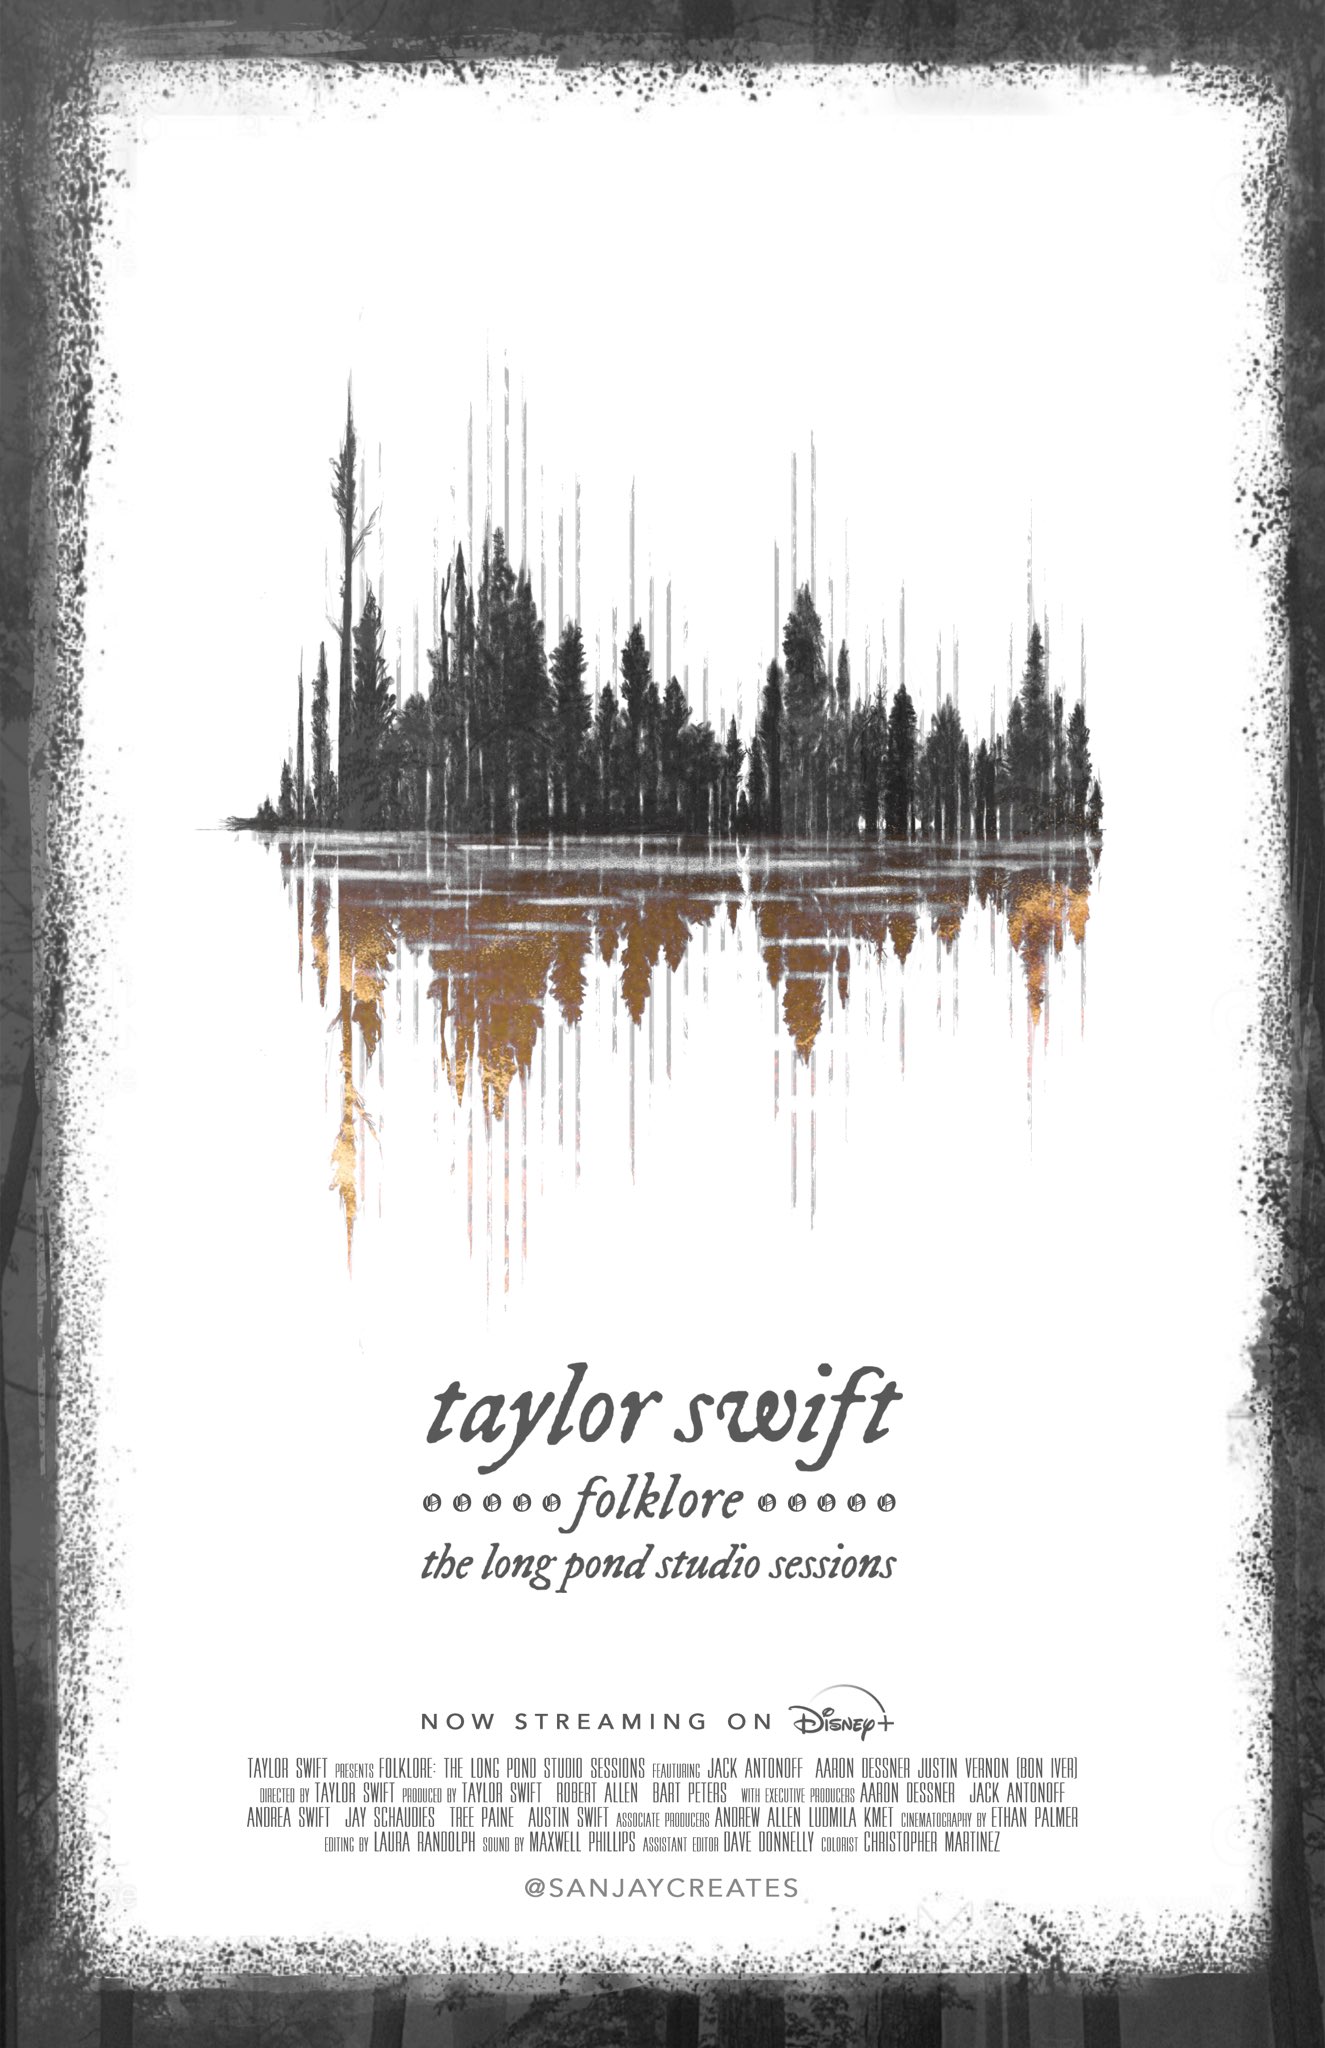 Sanjay (Artwork) on X: Taylor Swift - folklore: the long pond studio  sessions Illustrated Poster (this waveform is from the audio of the track  “august”) #Folklore #folkloreOnDisneyPlus #evermorealbum @taylorswift13  @taylornation13 @jackantonoff